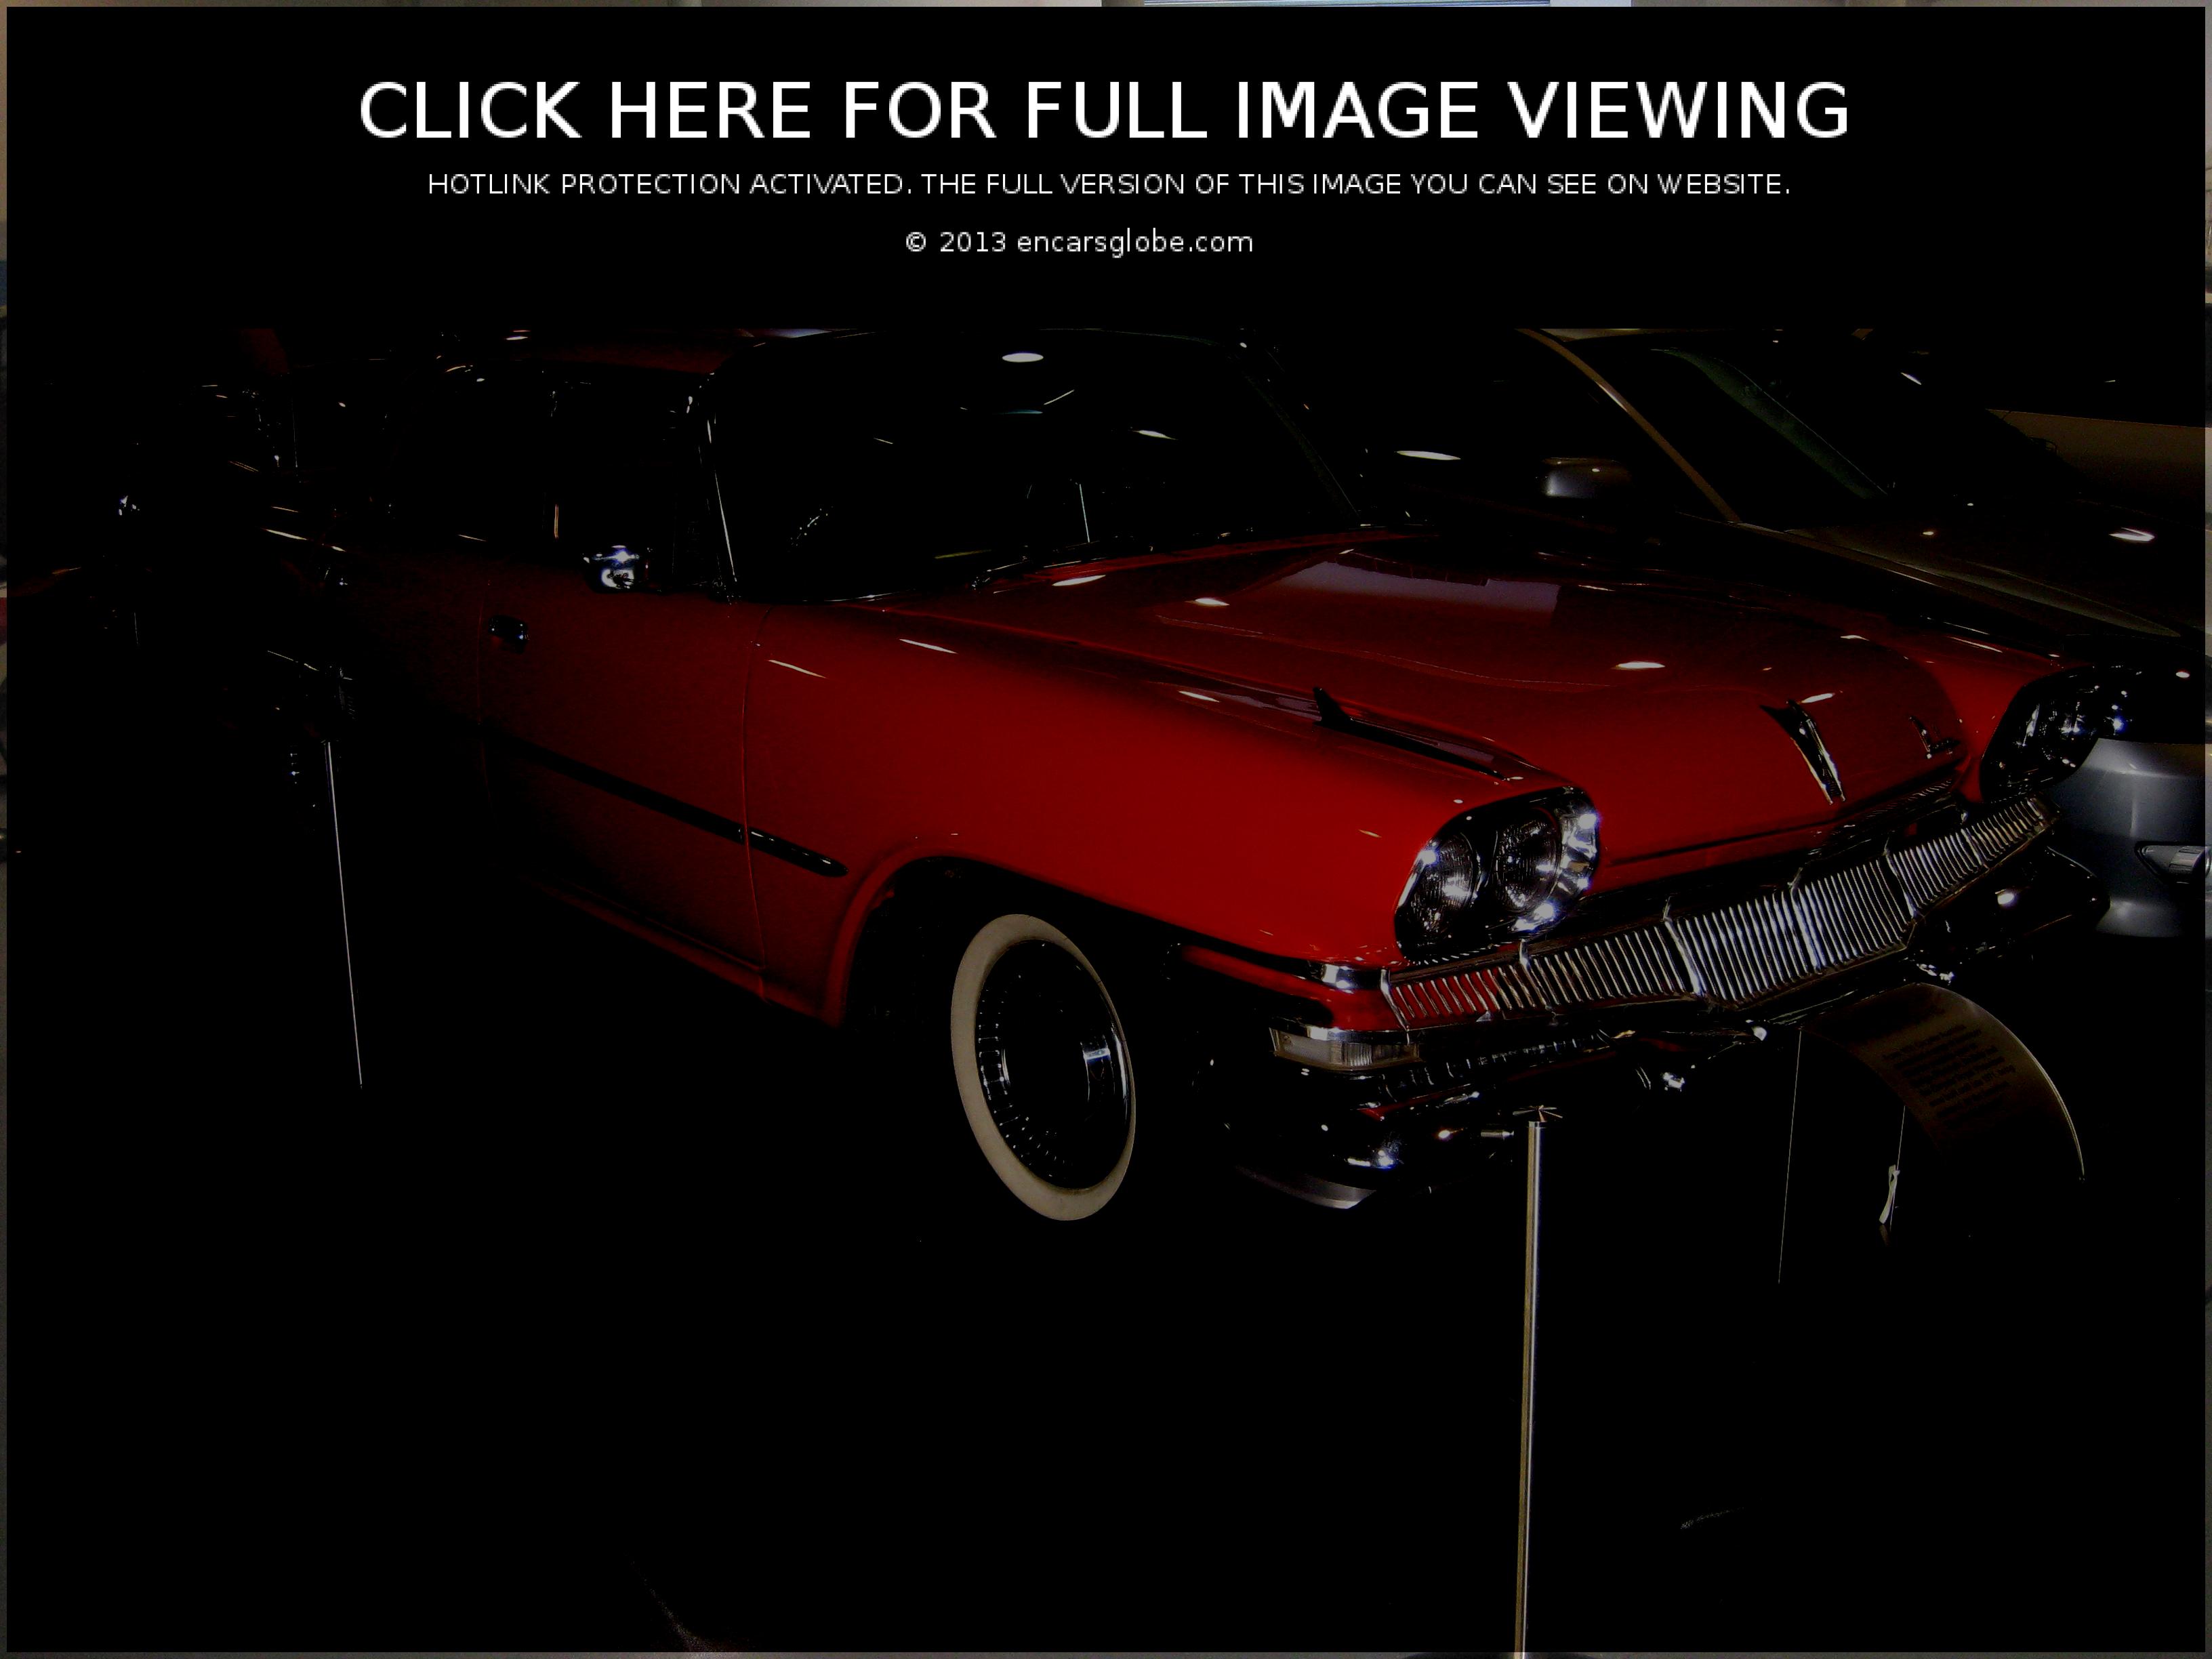 De Soto Diplomat Custom Photo Gallery: Photo #05 out of 12, Image ...